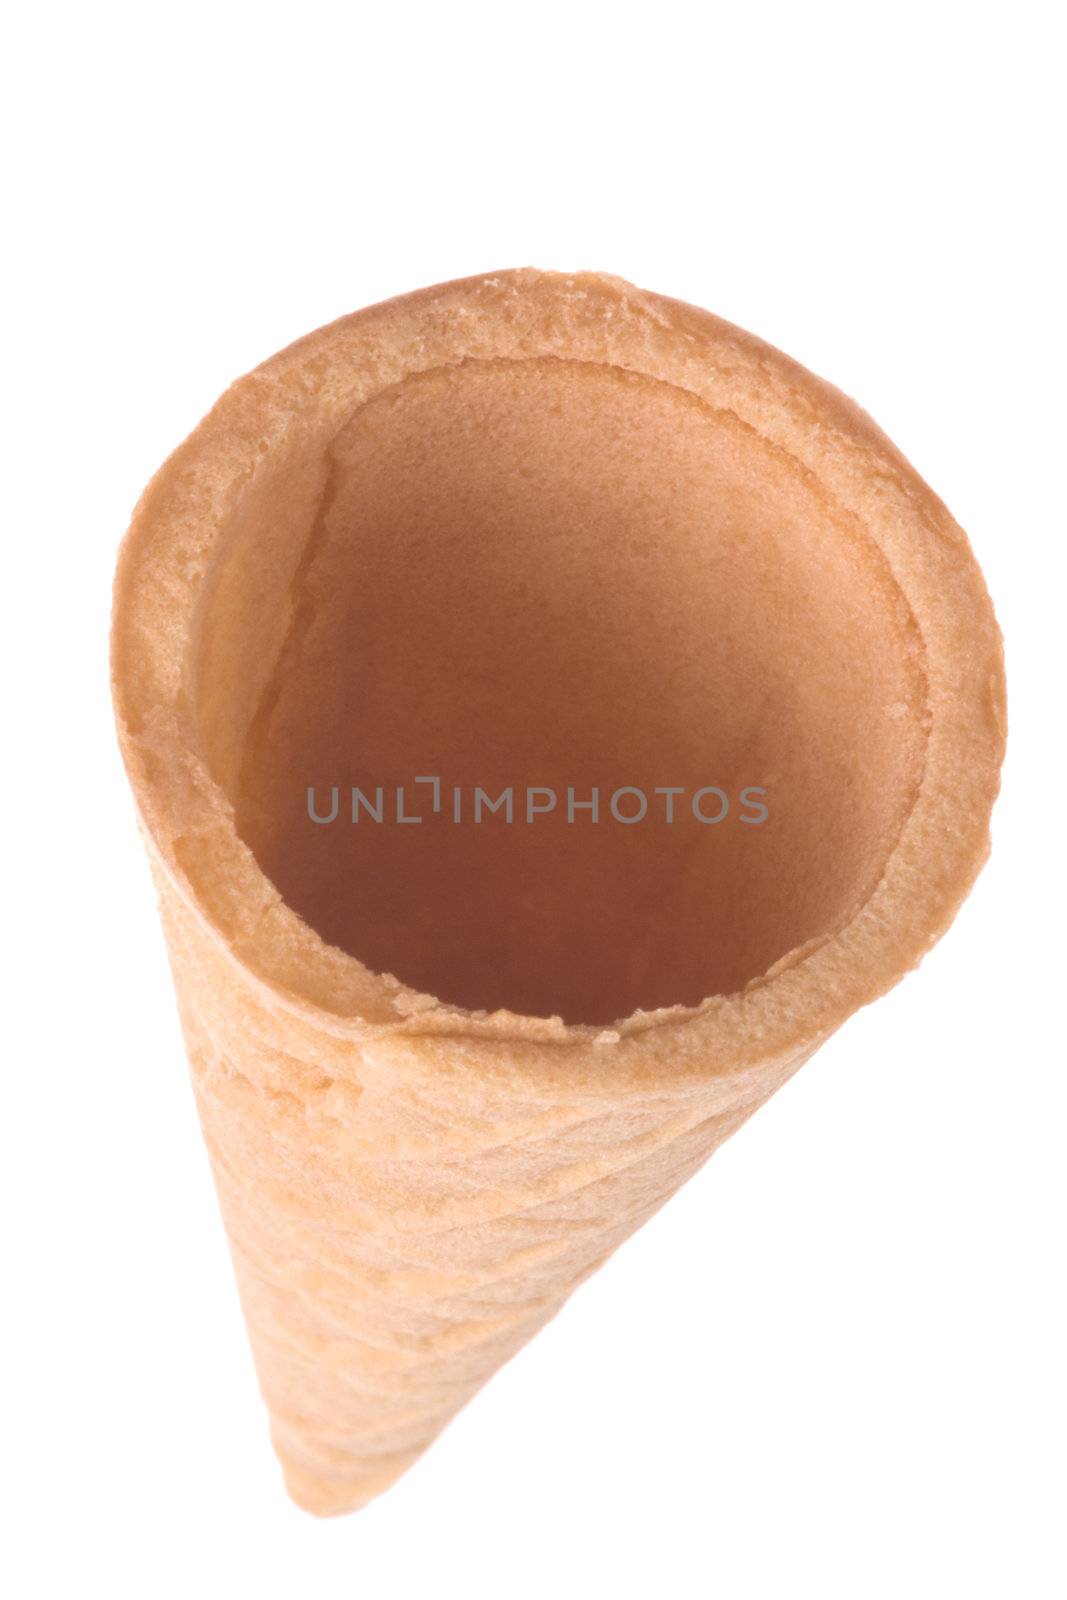 Isolated image of an ice cream cone.